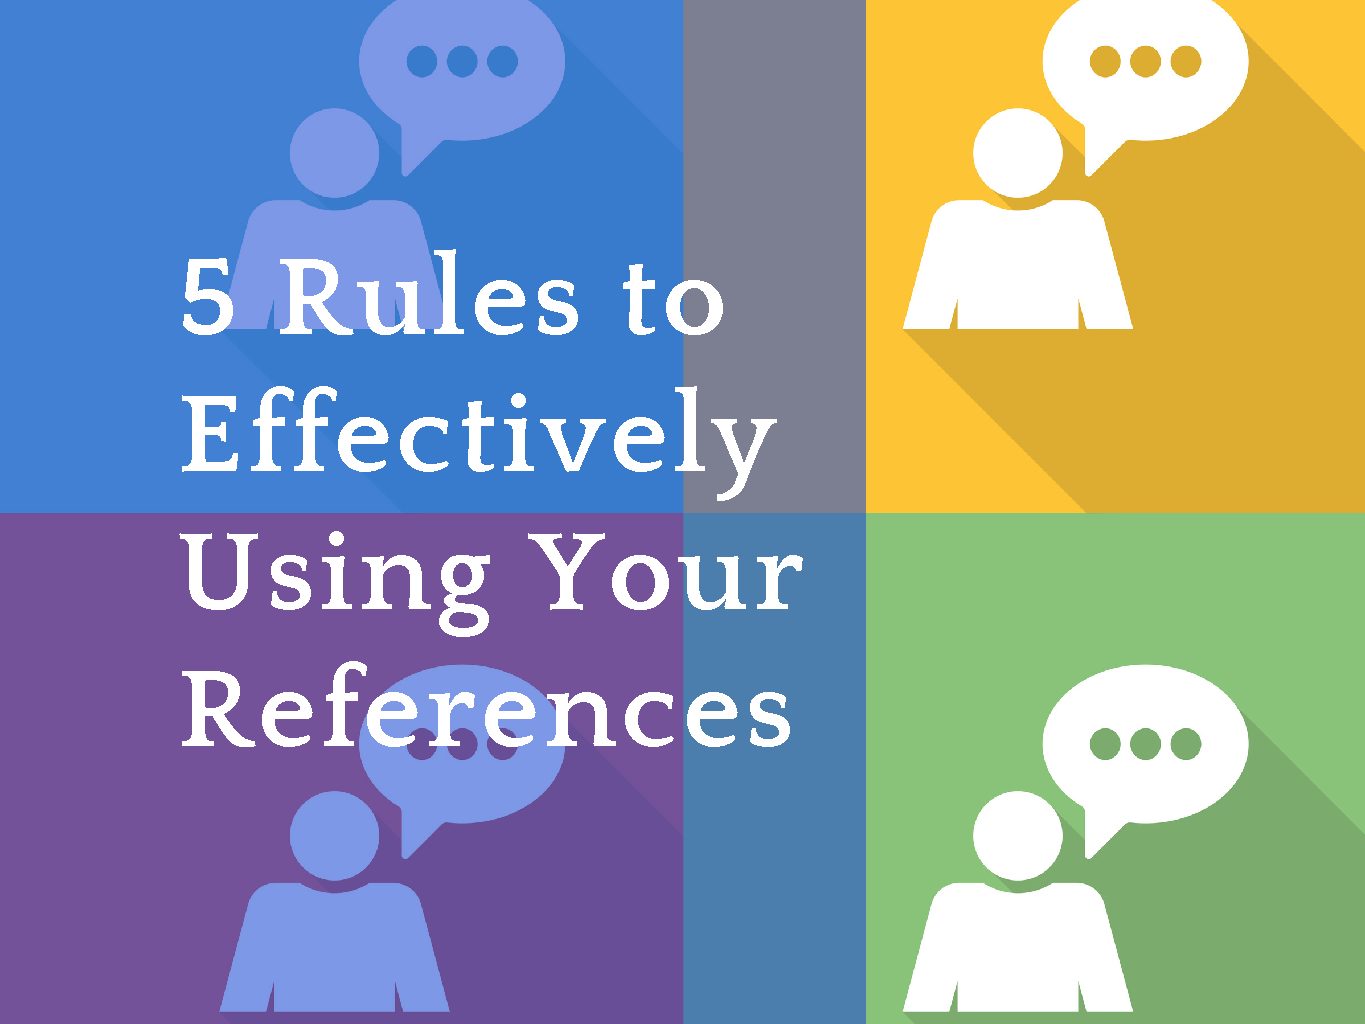 5 Rules to Effectively Using Your References